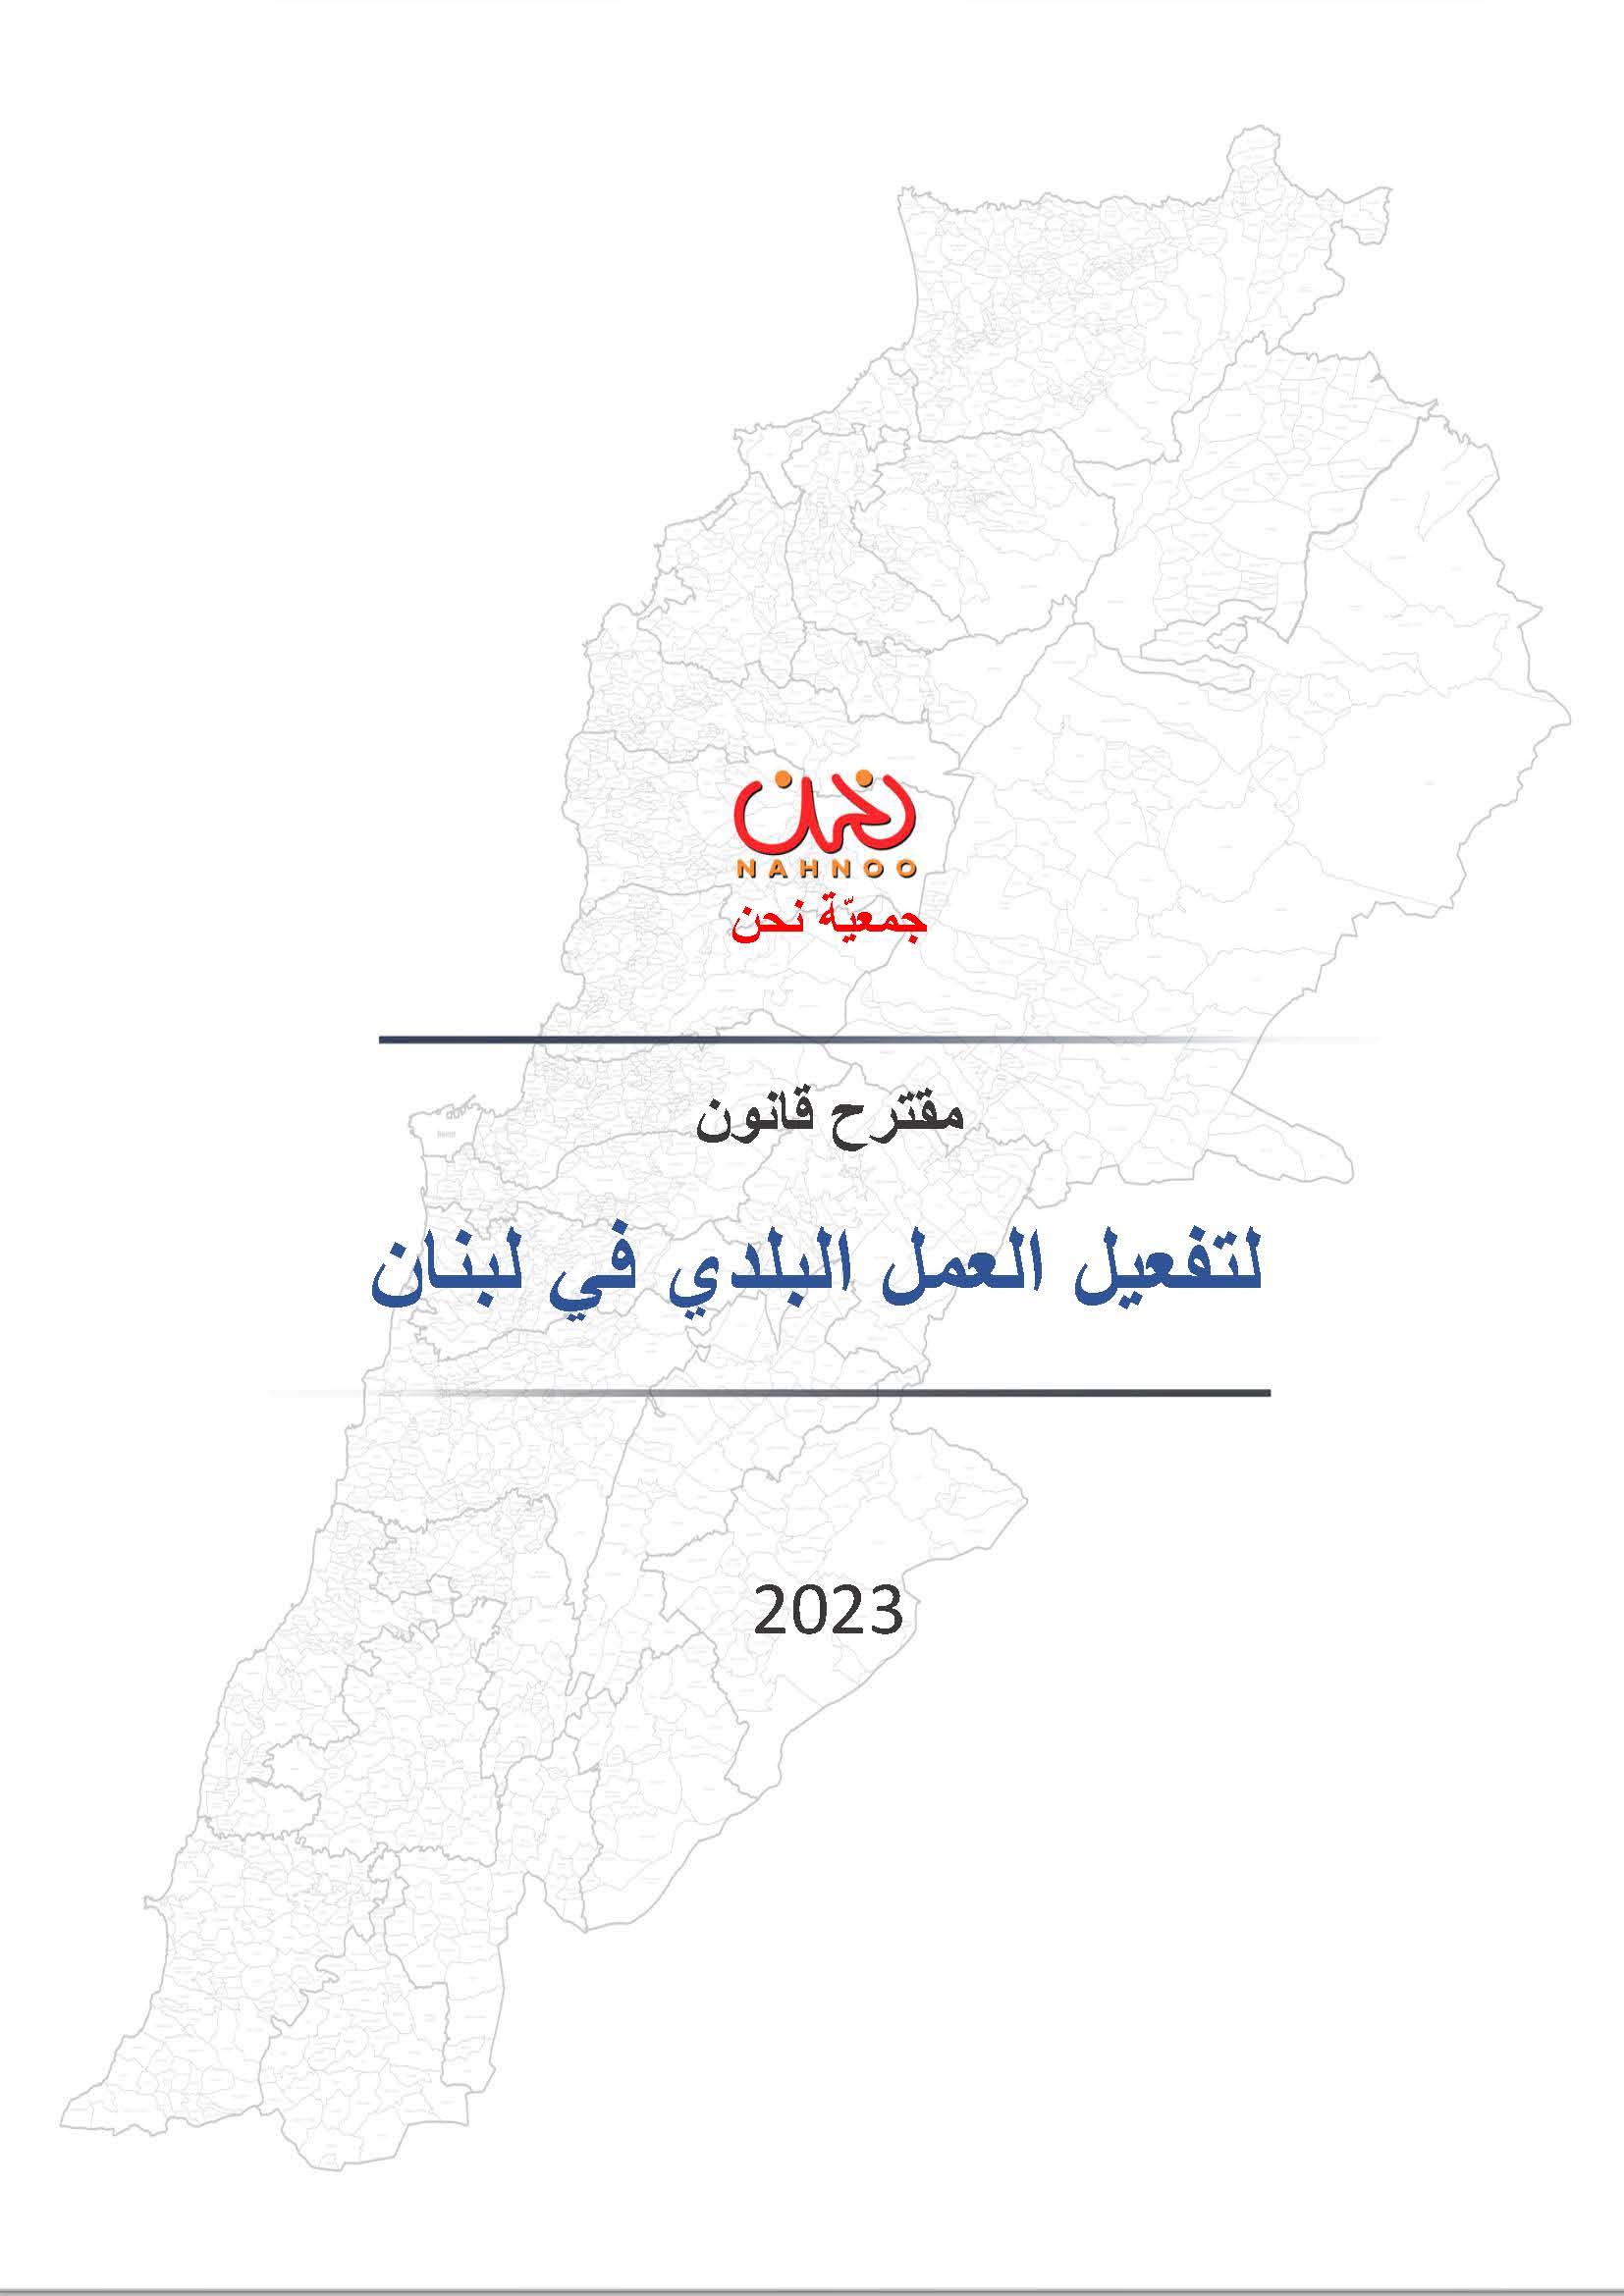 The Proposed Law to Improve Municipal Work in Lebanon